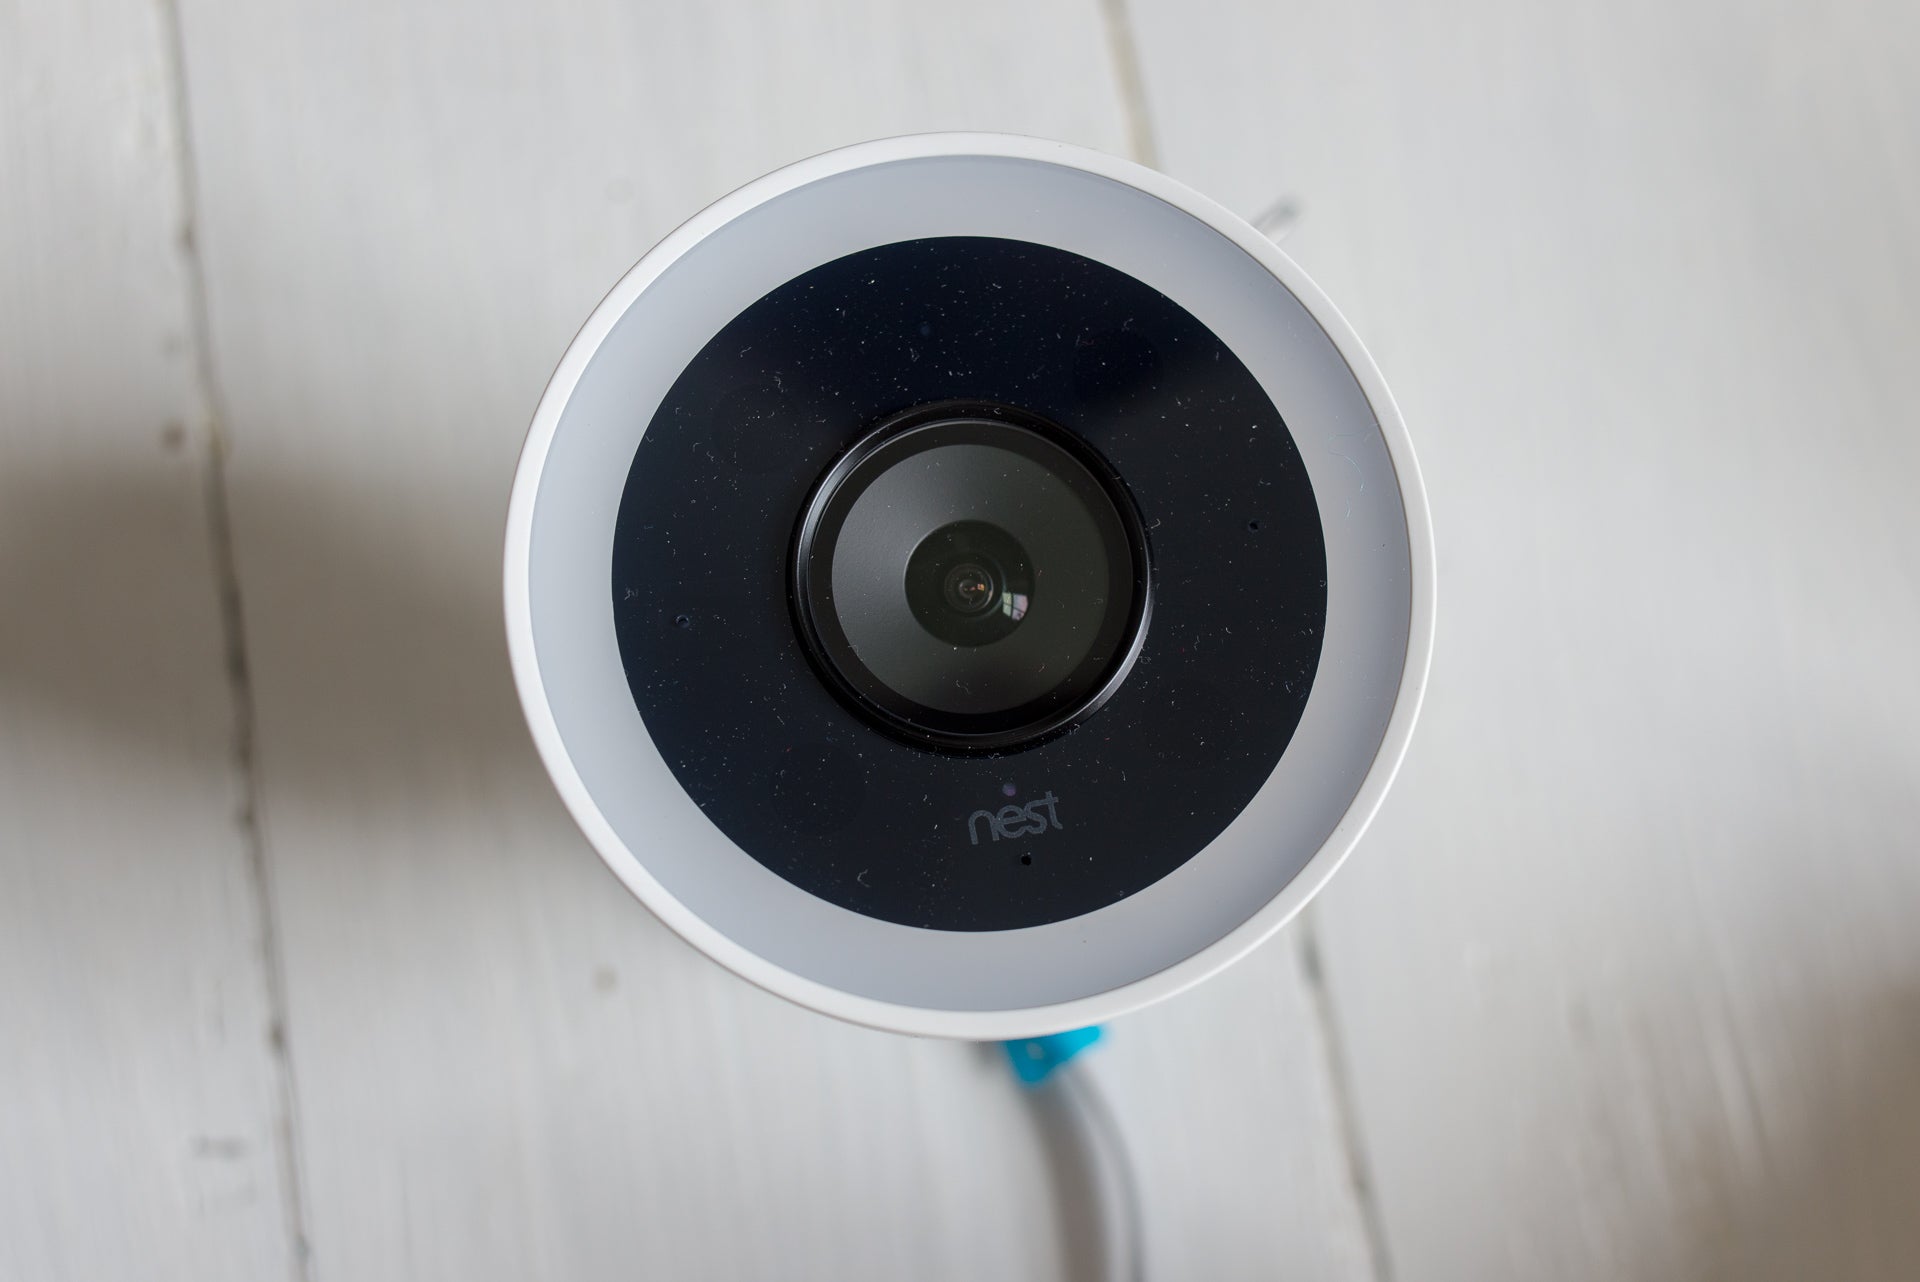 Google Nest camera users targeted in sex tape scam - here's how to spo...